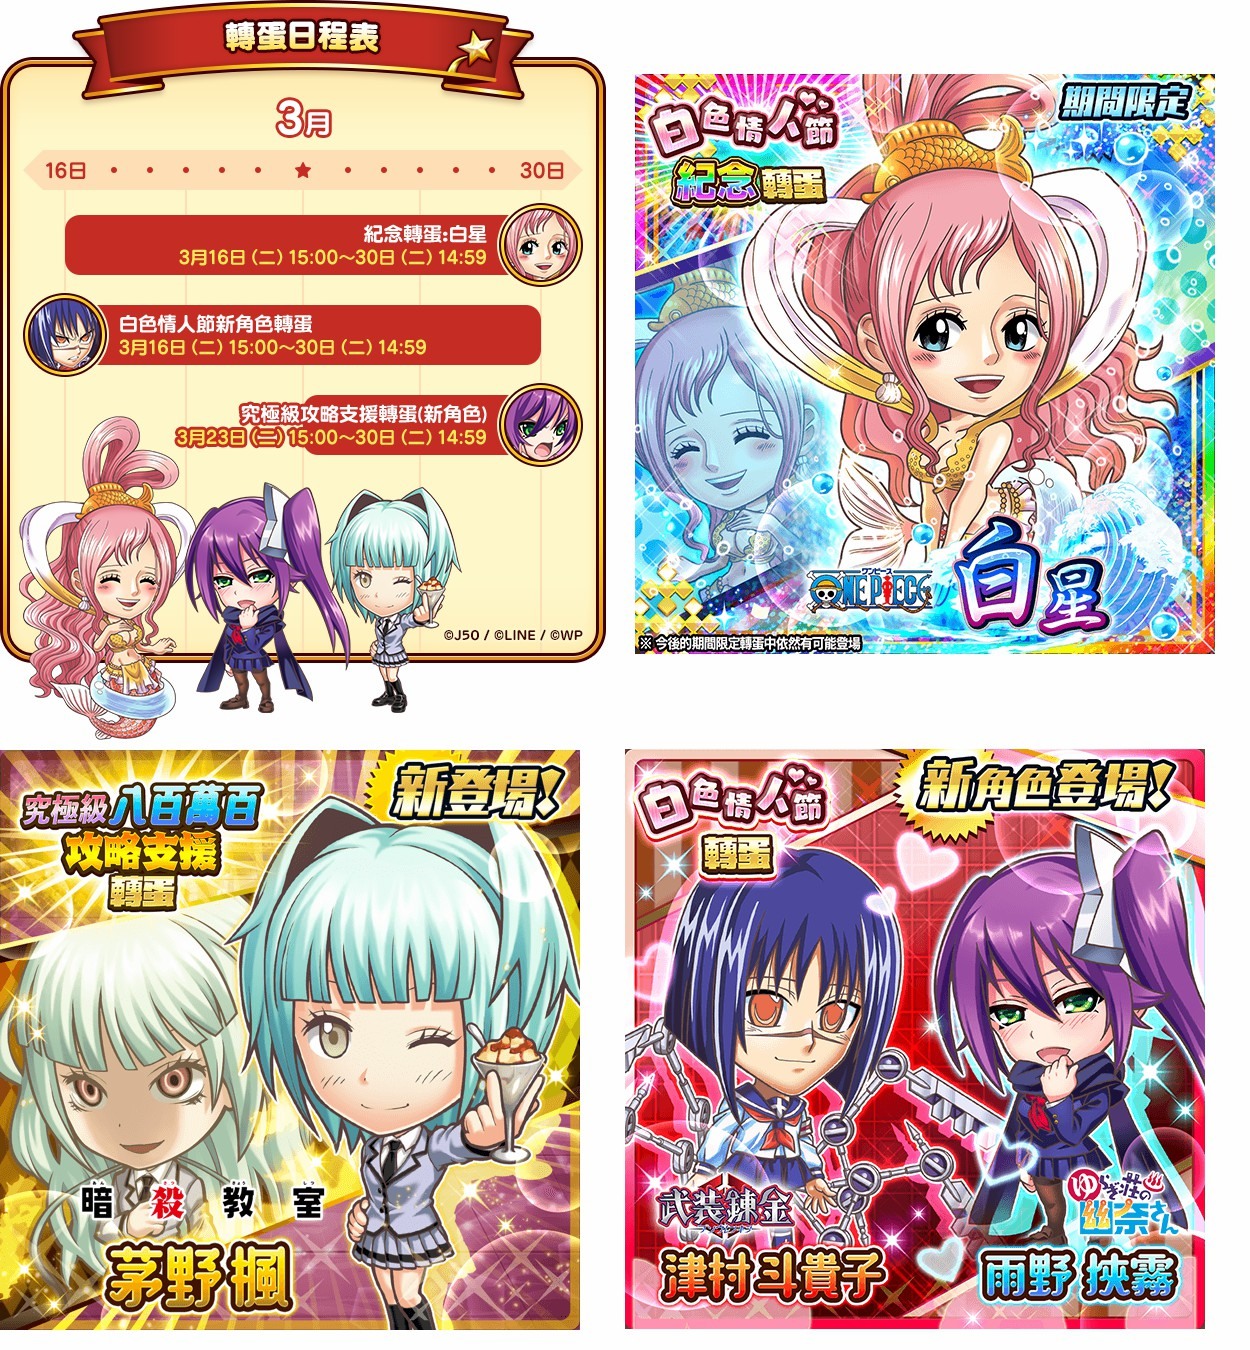 Jumputi Heroes Hero Bubbles White Valentine S Day Event Debut Various Female Characters Join Forces To Perform ジャンプチヒーローズ Newsdir3